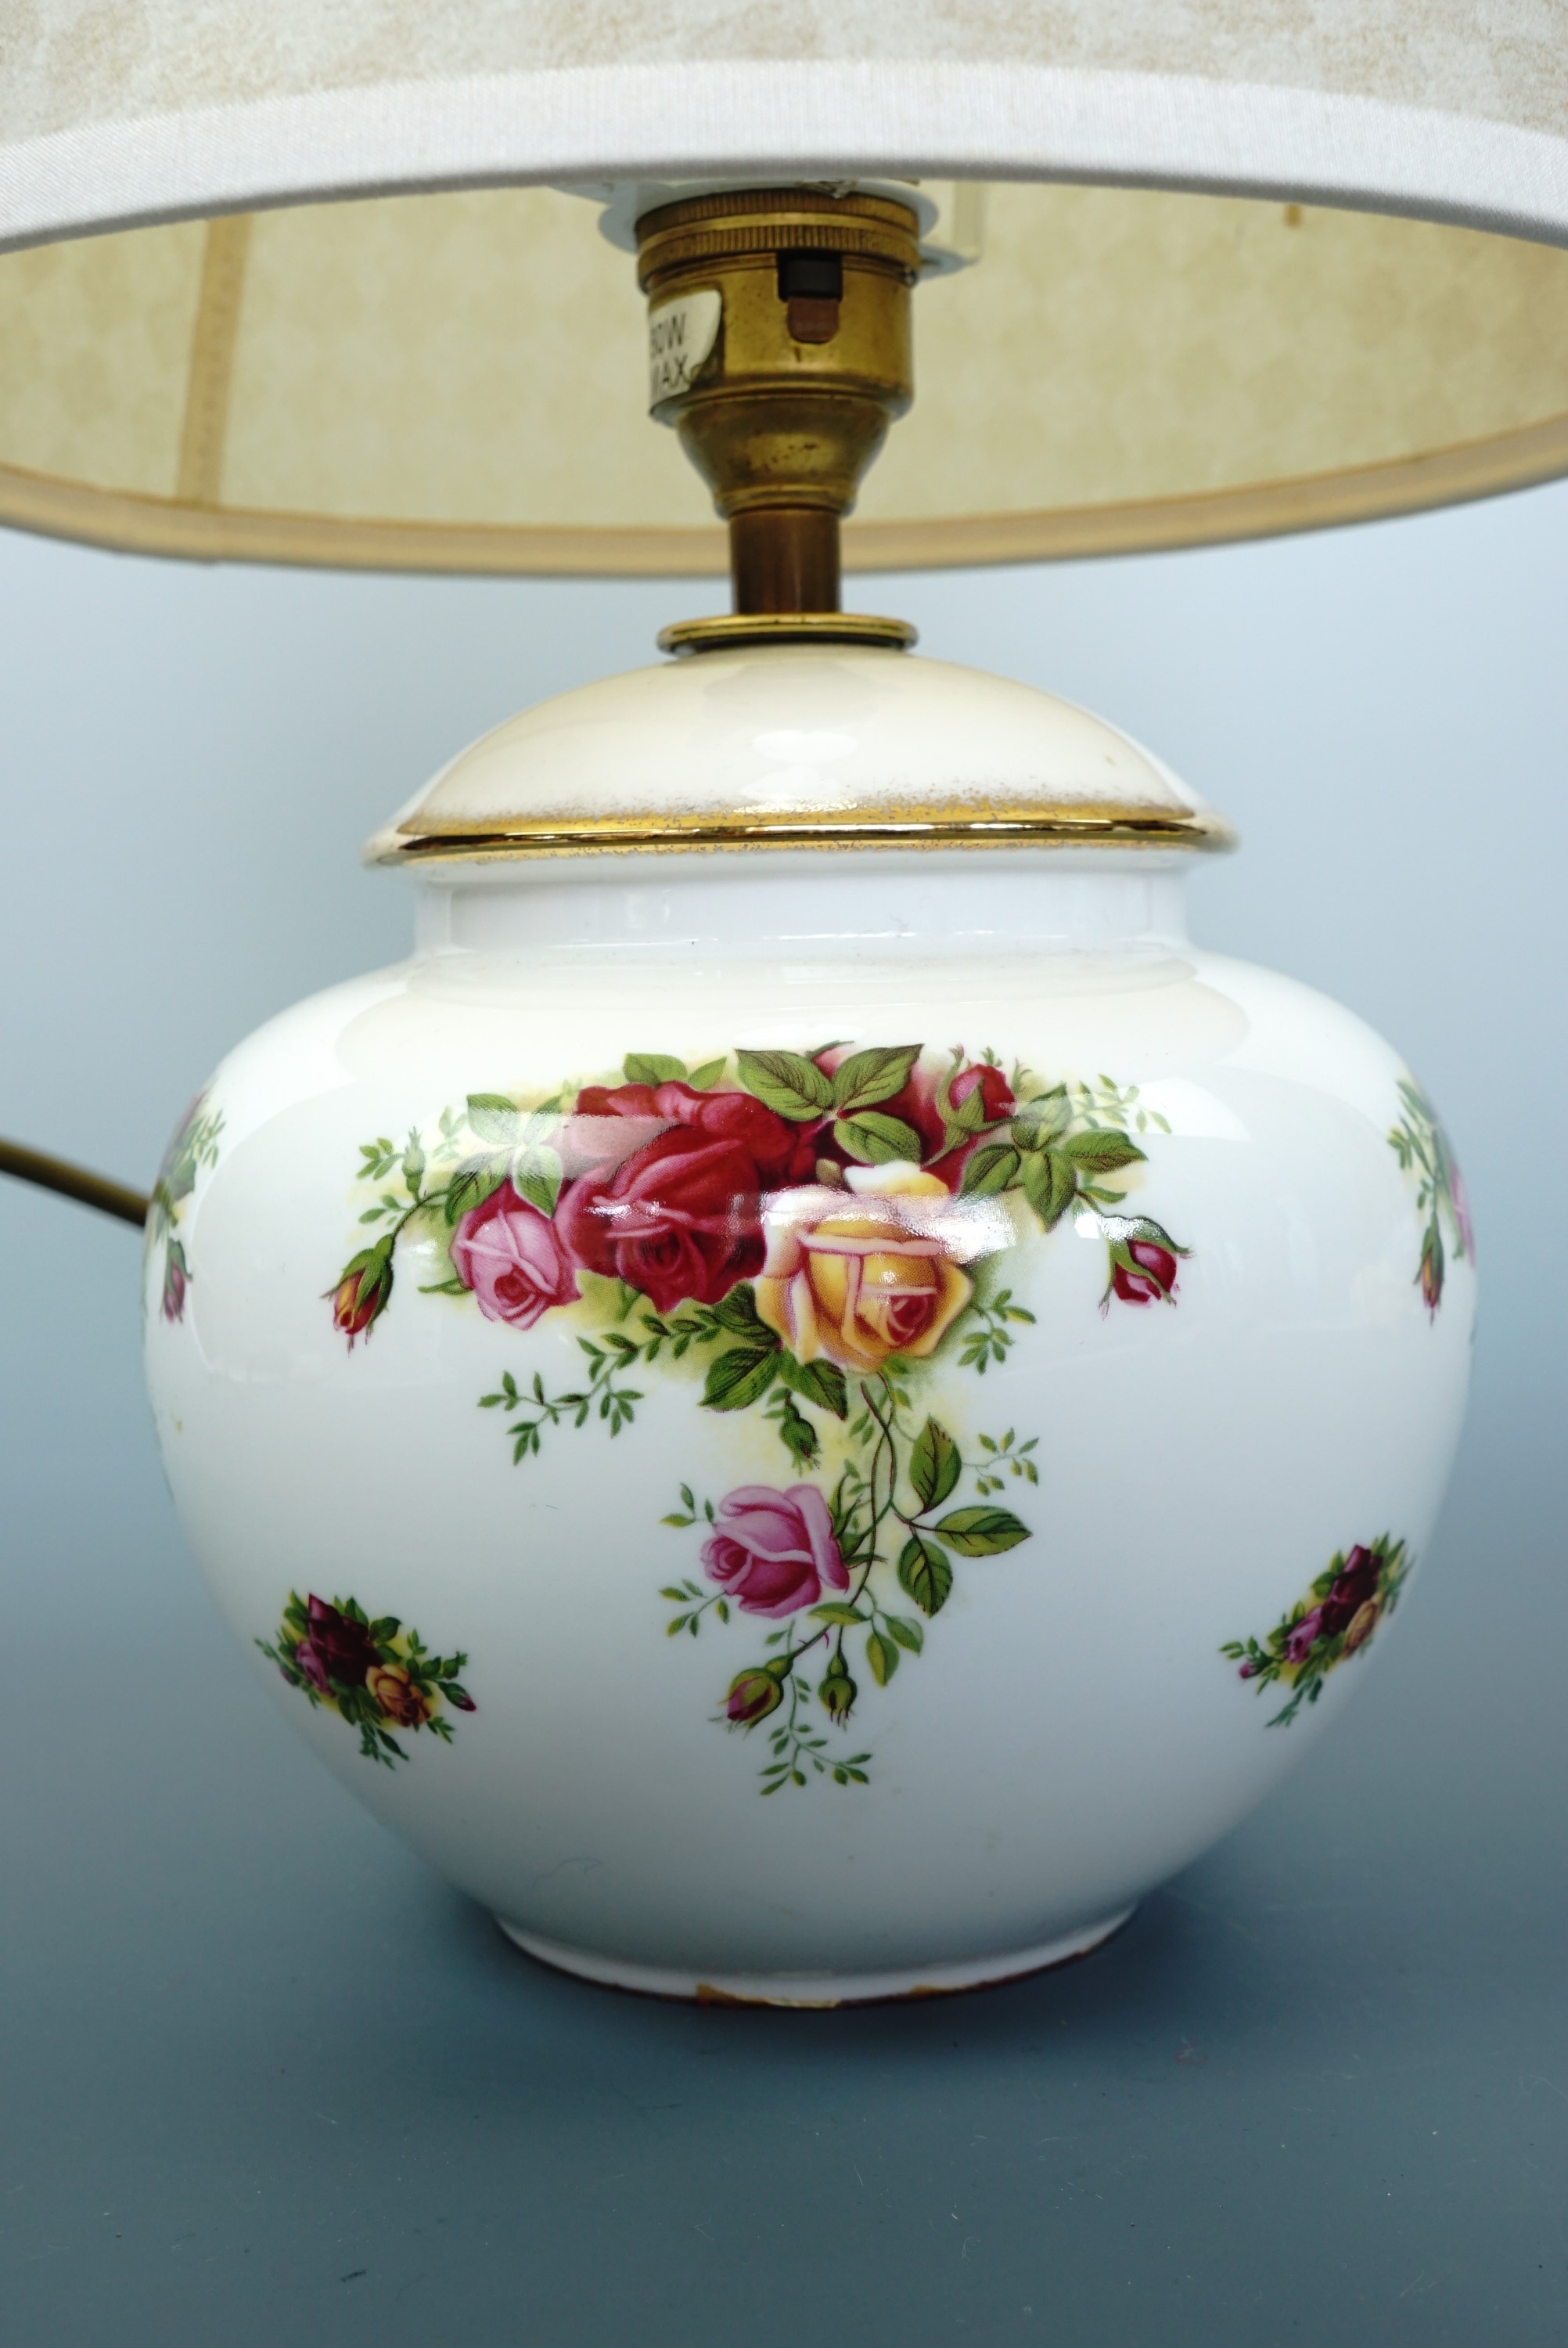 A Royal Albert Old Country Rose table lamp, 40 cm, (free of damage) - Image 2 of 2